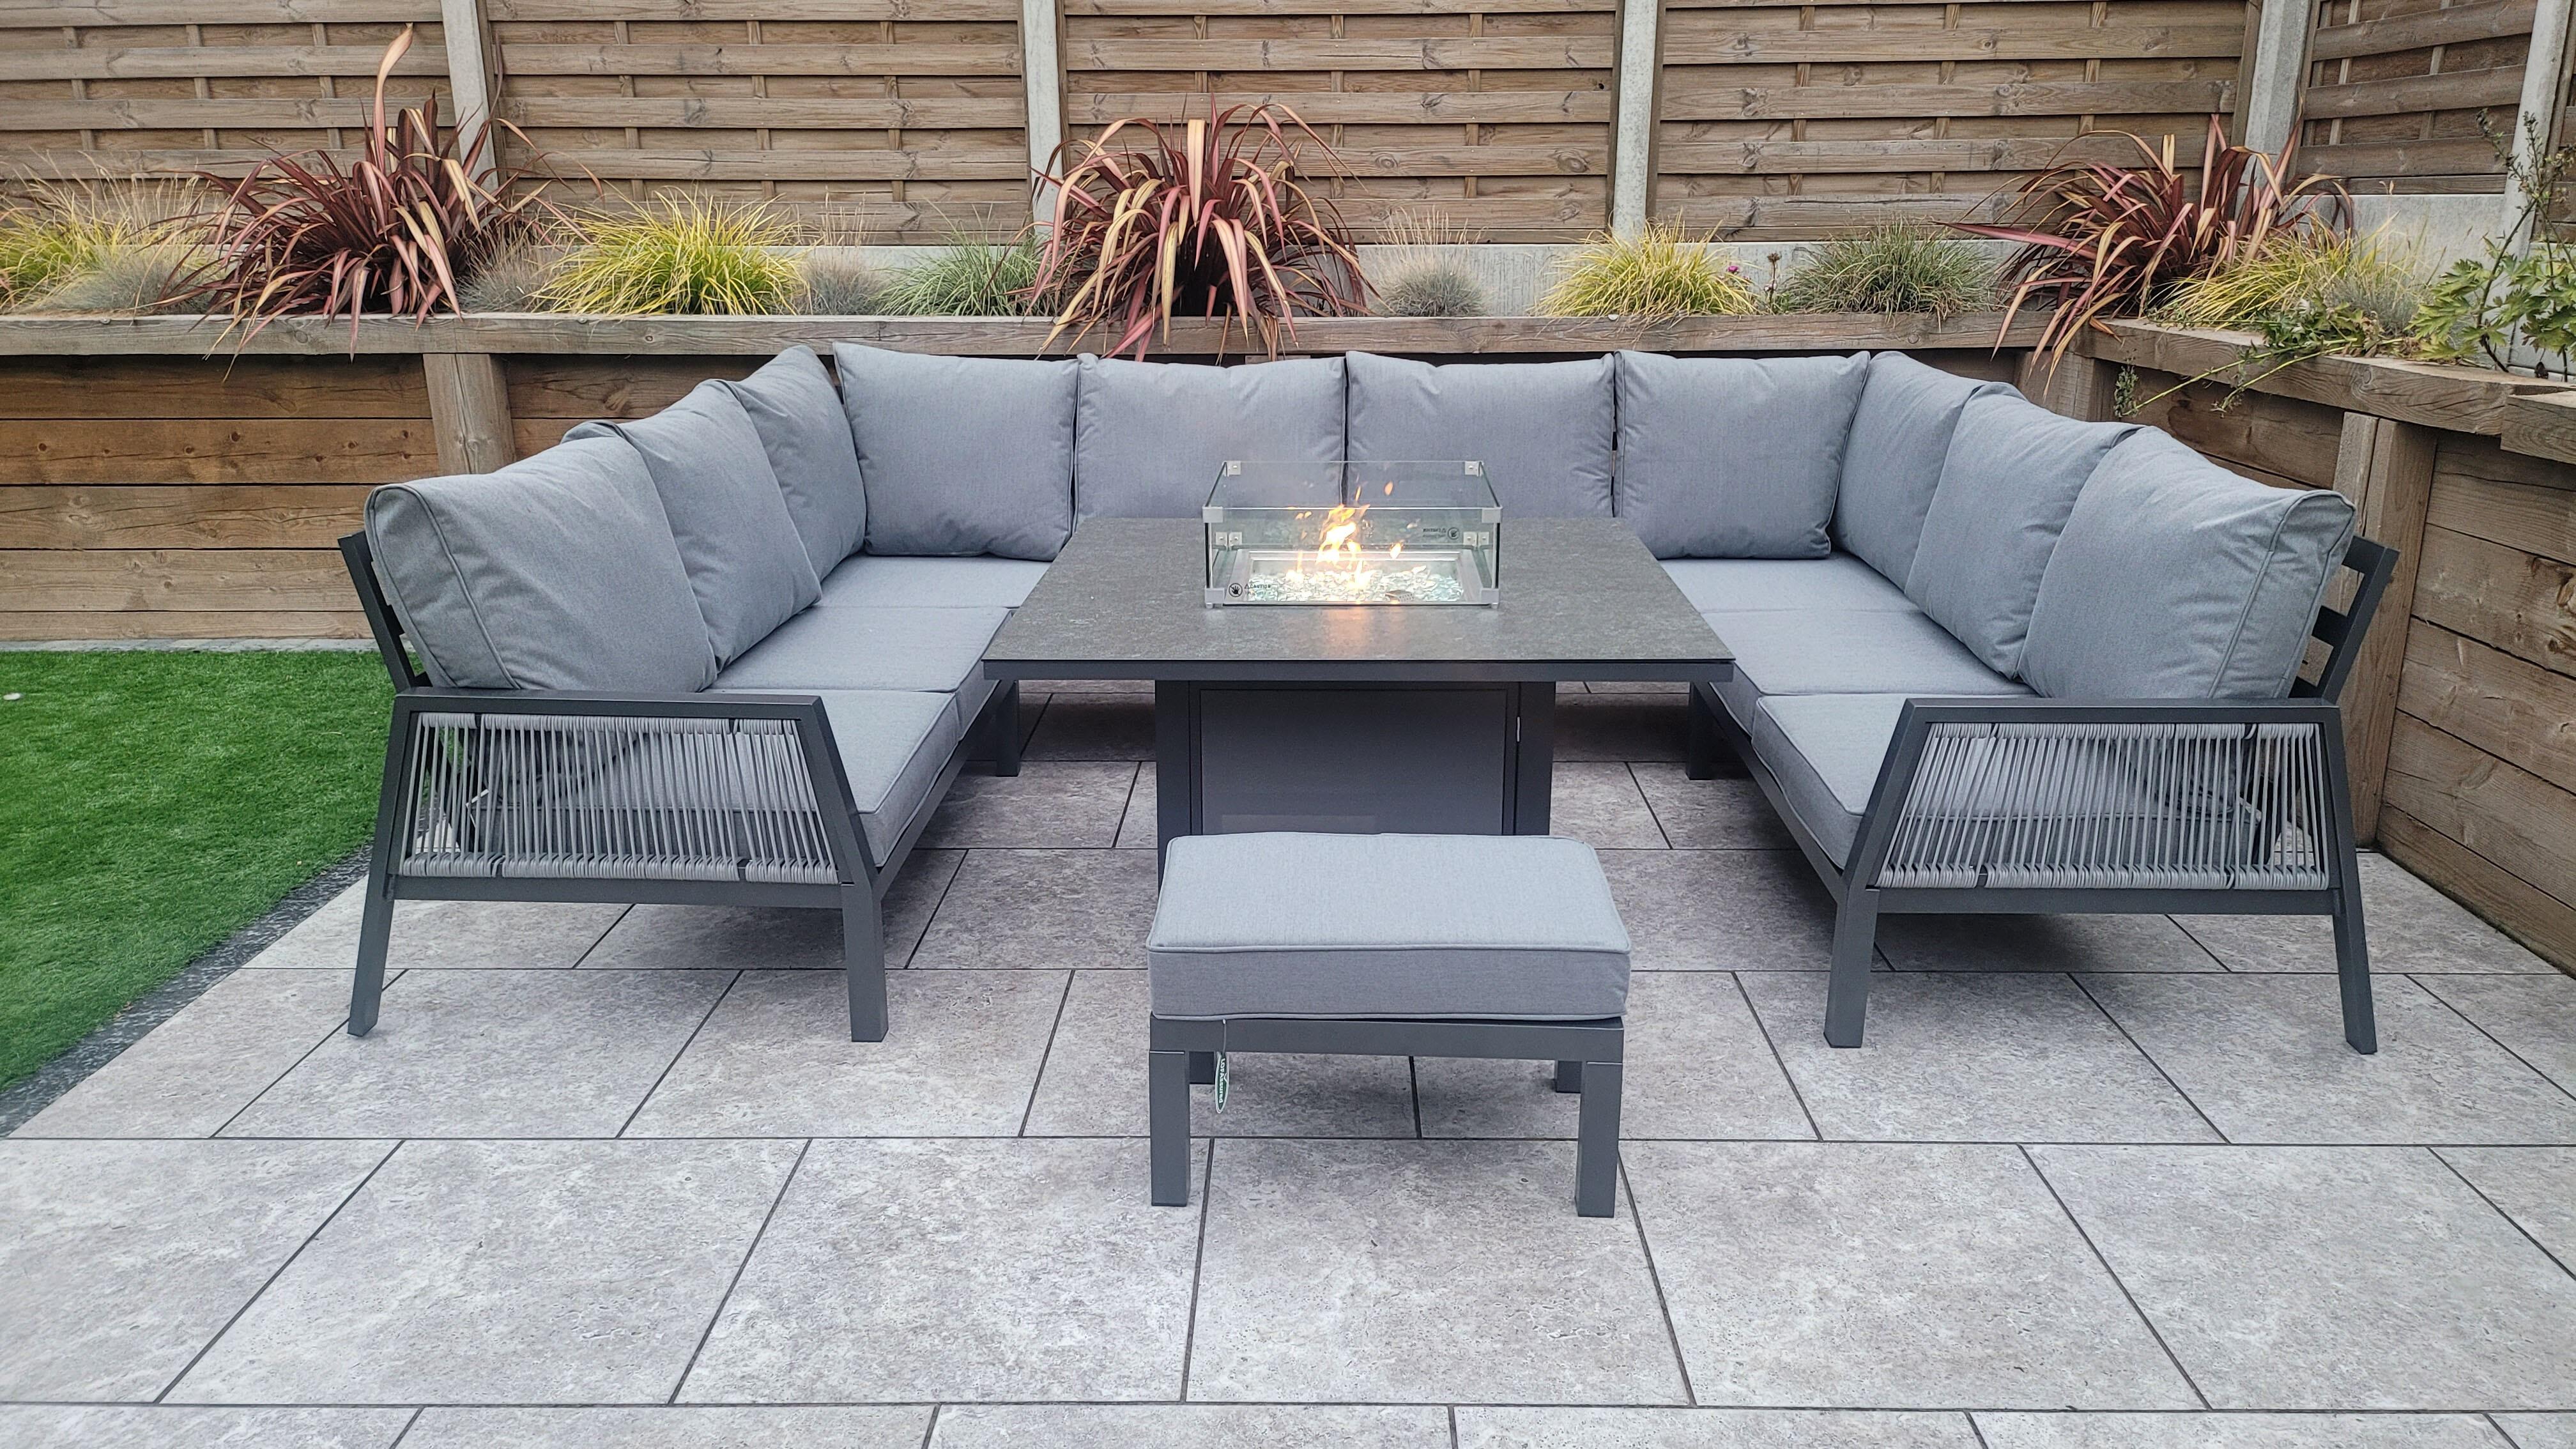 An image of Signature Weave Bettina U Shape With Gas Fire Pit Garden Furniture